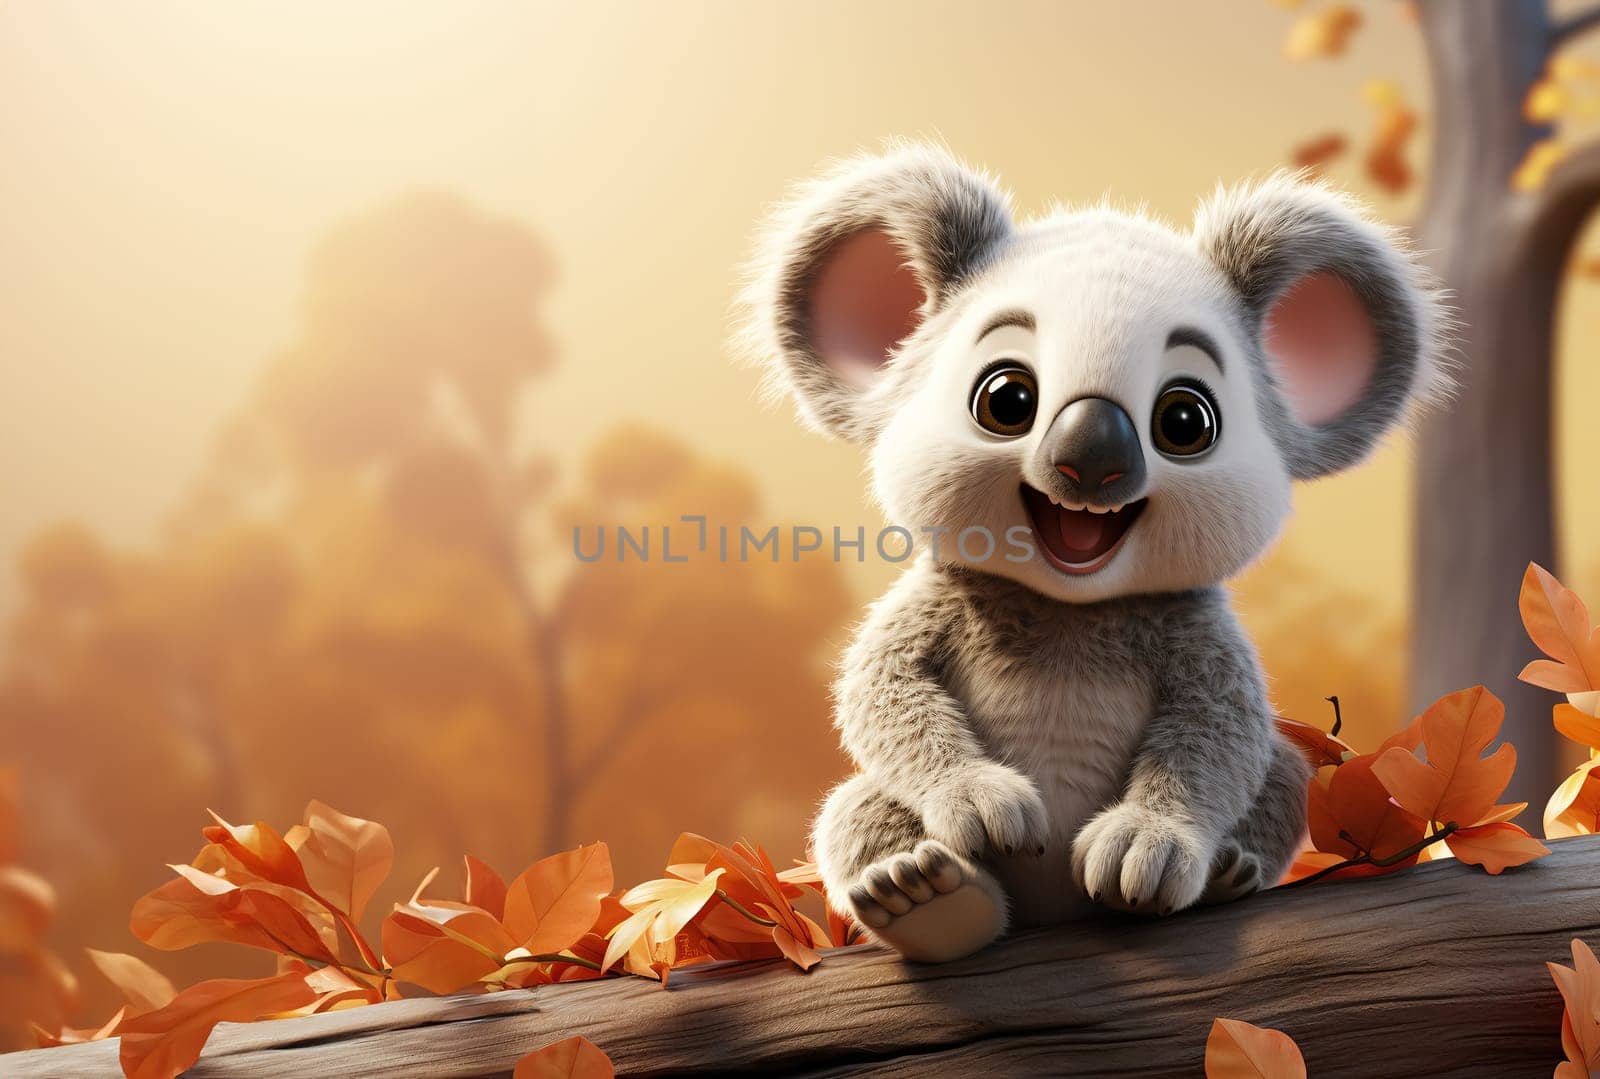 A cheerful animated koala is perched on a tree branch among autumn leaves with a warm sunset casting a glow on the scene - Generative AI